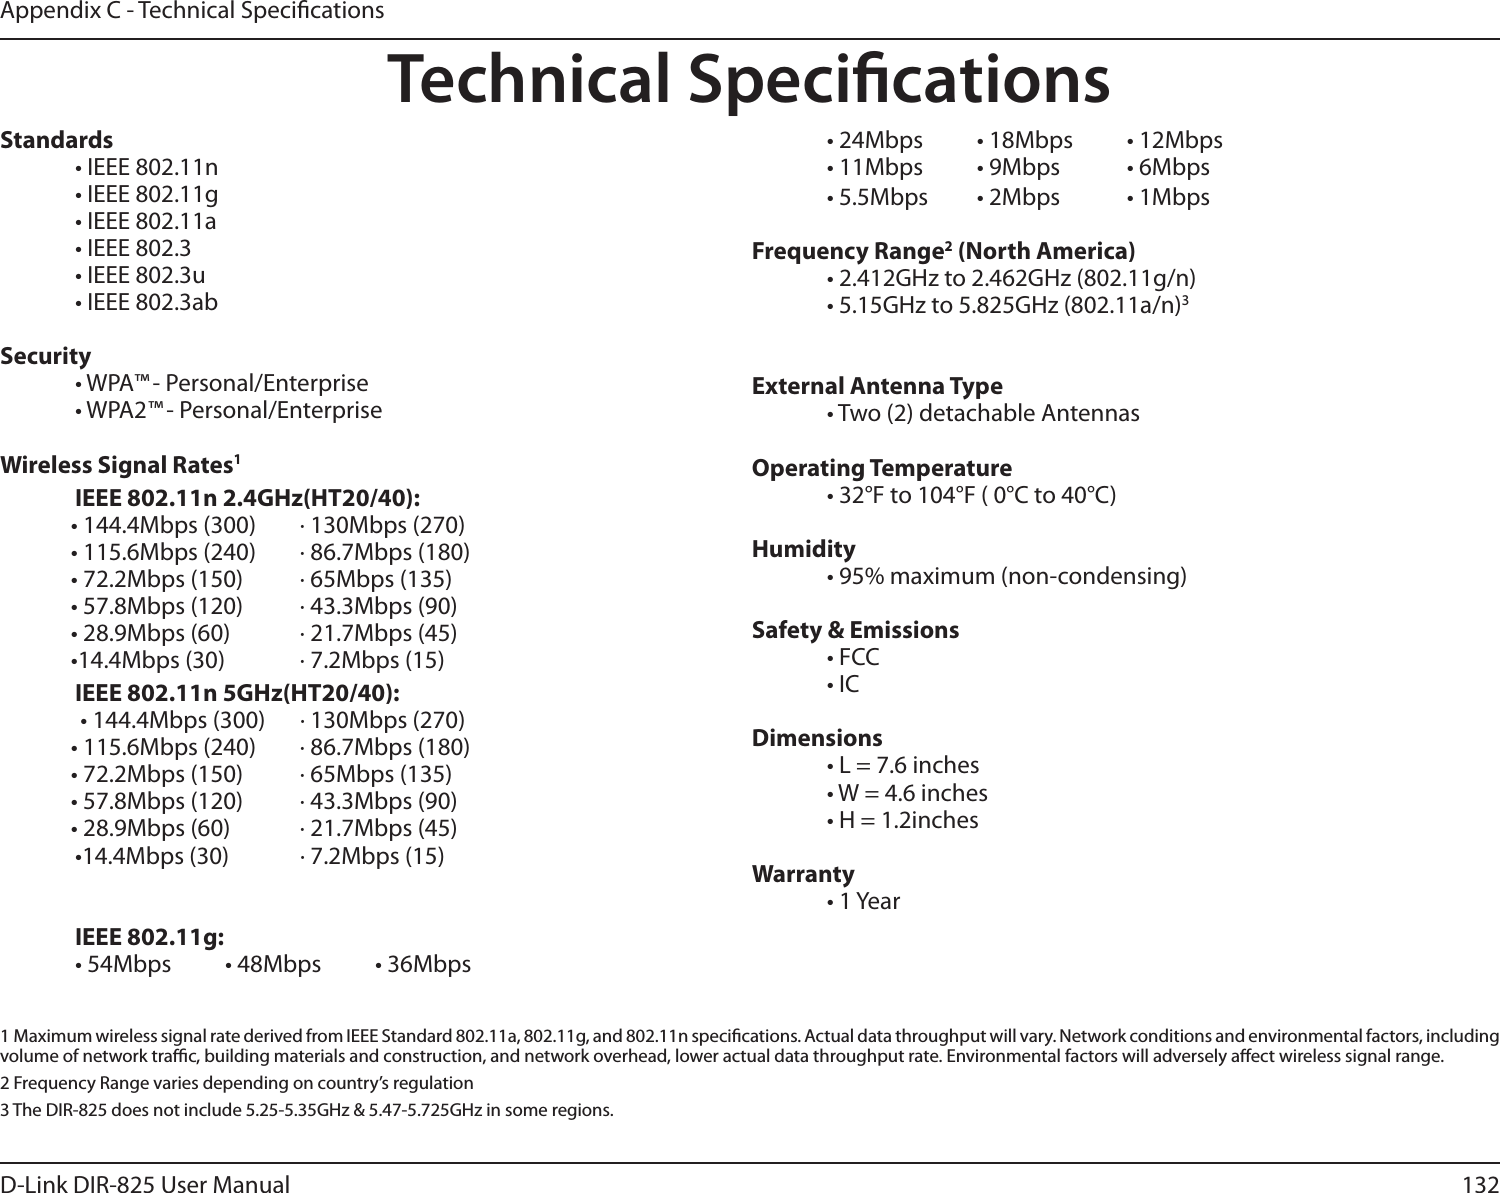 132D-Link DIR-825 User ManualAppendix C - Technical SpecicationsTechnical SpecicationsStandards  • IEEE 802.11n  • IEEE 802.11g  • IEEE 802.11a  • IEEE 802.3  • IEEE 802.3u  • IEEE 802.3abSecurity  • WPA™ - Personal/Enterprise  • WPA2™ - Personal/Enterprise Wireless Signal Rates1  IEEE 802.11n 2.4GHz(HT20/40):• 144.4Mbps (300)     · 130Mbps (270)• 115.6Mbps (240)      · 86.7Mbps (180)• 72.2Mbps (150)       · 65Mbps (135)• 57.8Mbps (120)       · 43.3Mbps (90)• 28.9Mbps (60)  · 21.7Mbps (45)•14.4Mbps (30)  · 7.2Mbps (15)  IEEE 802.11n 5GHz(HT20/40):   • 144.4Mbps (300)     · 130Mbps (270)• 115.6Mbps (240)      · 86.7Mbps (180)• 72.2Mbps (150)       · 65Mbps (135)• 57.8Mbps (120)       · 43.3Mbps (90)• 28.9Mbps (60)  · 21.7Mbps (45)  •14.4Mbps (30)  · 7.2Mbps (15)   IEEE 802.11g:  • 54Mbps  • 48Mbps  • 36Mbps  • 24Mbps  • 18Mbps  • 12Mbps  • 11Mbps  • 9Mbps  • 6Mbps  • 5.5Mbps  • 2Mbps  • 1MbpsFrequency Range2 (North America)  • 2.412GHz to 2.462GHz (802.11g/n)  • 5.15GHz to 5.825GHz (802.11a/n)3External Antenna Type  • Two (2) detachable AntennasOperating Temperature  • 32°F to 104°F ( 0°C to 40°C)Humidity  • 95% maximum (non-condensing)Safety &amp; Emissions  • FCC    • ICDimensions  • L = 7.6 inches  • W = 4.6 inches  • H = 1.2inchesWarranty  • 1 Year1  Maximum wireless signal rate derived from IEEE Standard 802.11a, 802.11g, and 802.11n specications. Actual data throughput will vary. Network conditions and environmental factors, including volume of network trac, building materials and construction, and network overhead, lower actual data throughput rate. Environmental factors will adversely aect wireless signal range.2 Frequency Range varies depending on country’s regulation3 The DIR-825 does not include 5.25-5.35GHz &amp; 5.47-5.725GHz in some regions.